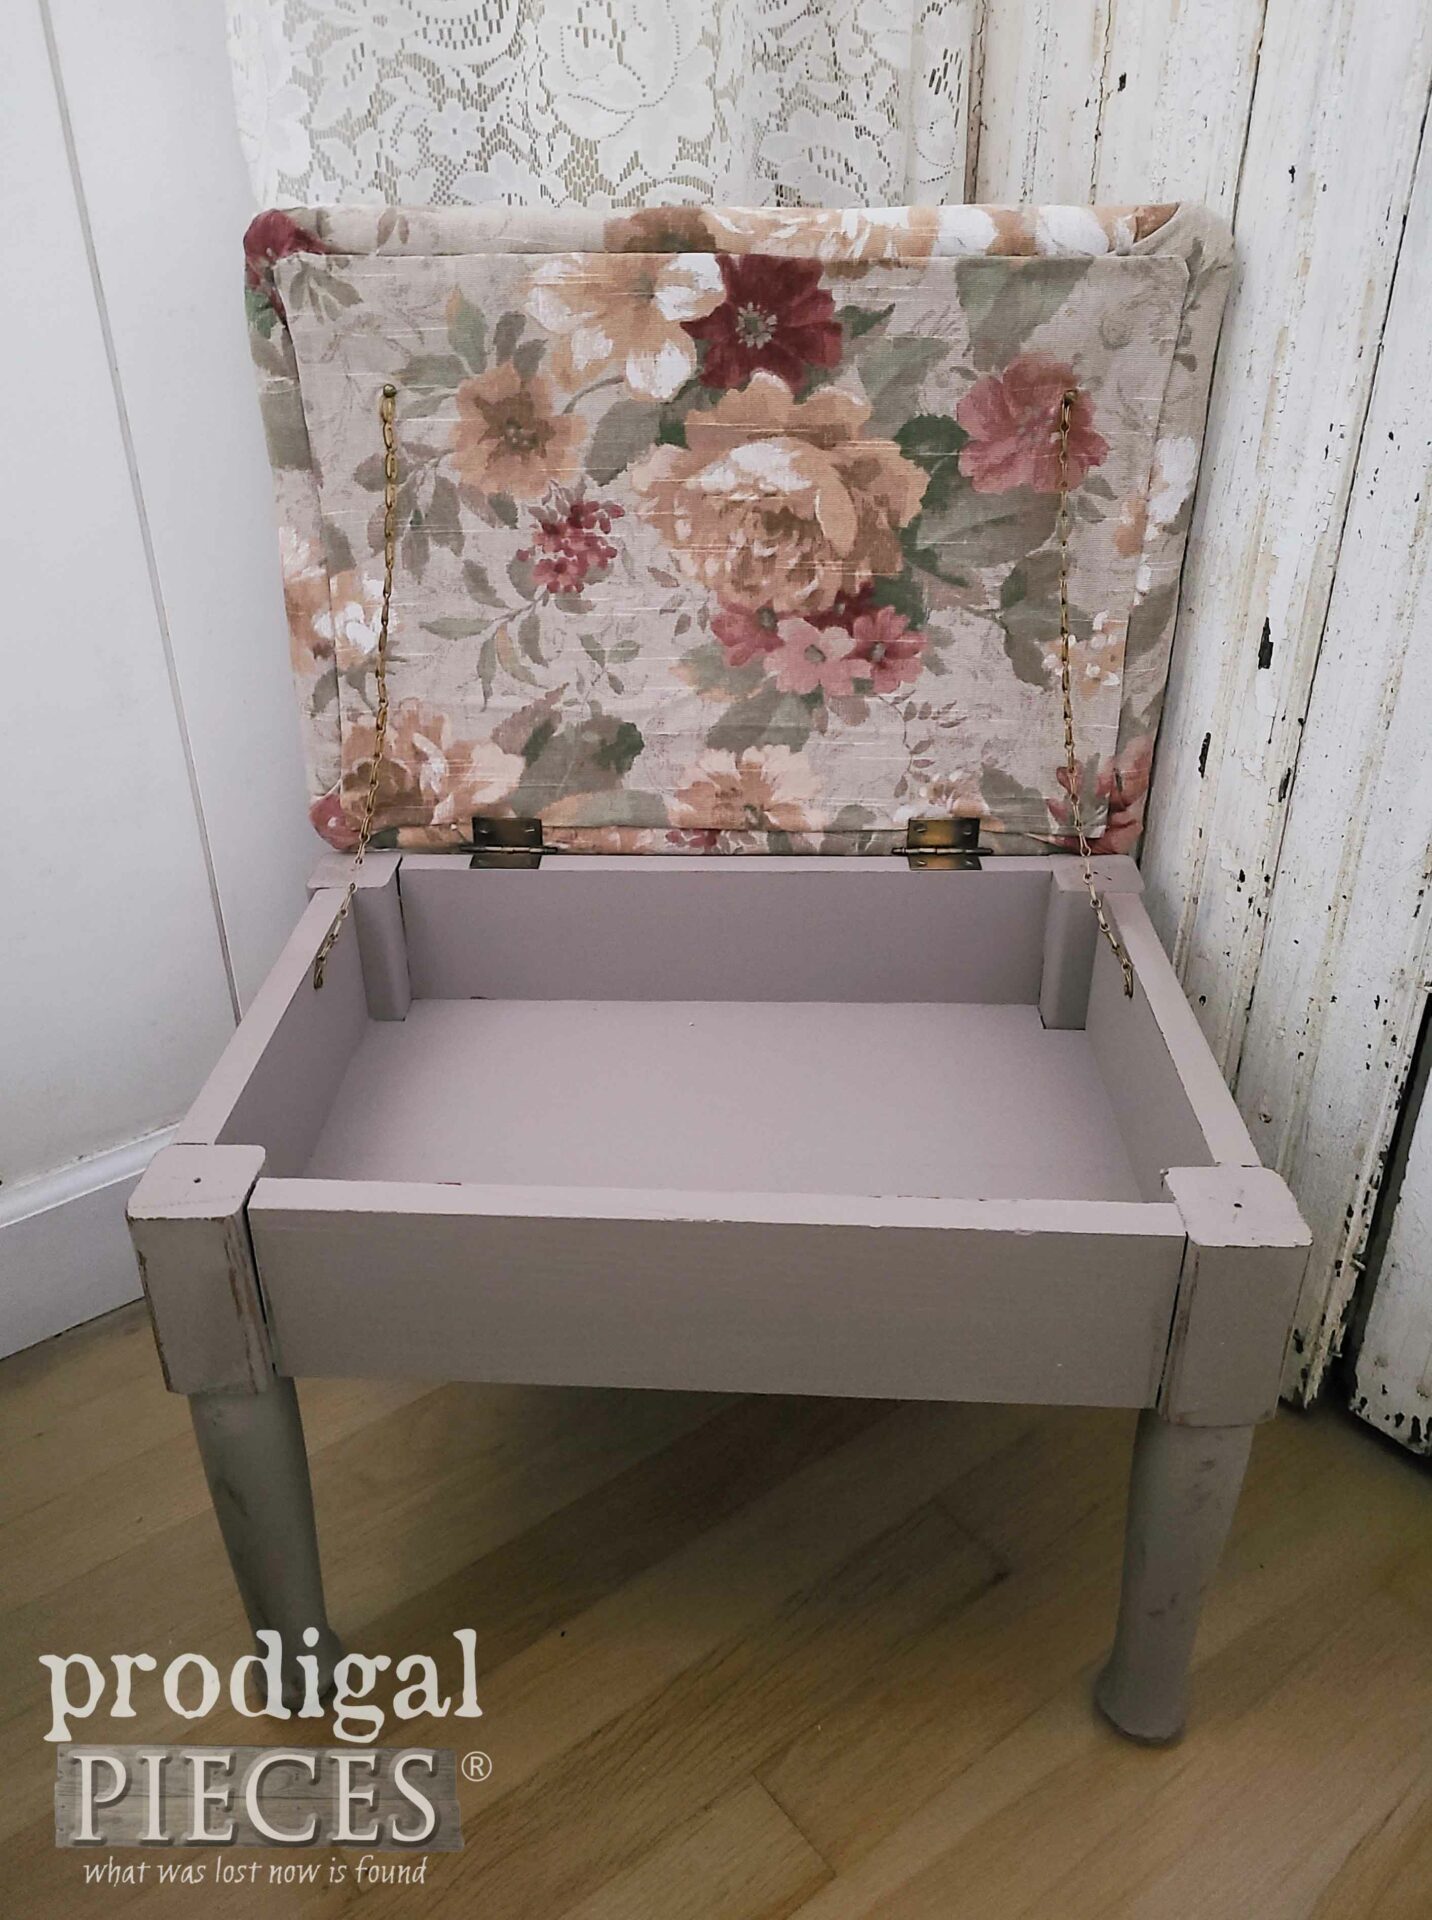 Open Vintage Thrifted Footstool by Larissa of Prodigal Pieces | prodigalpieces.com #prodigalpieces #vintage #upholstery